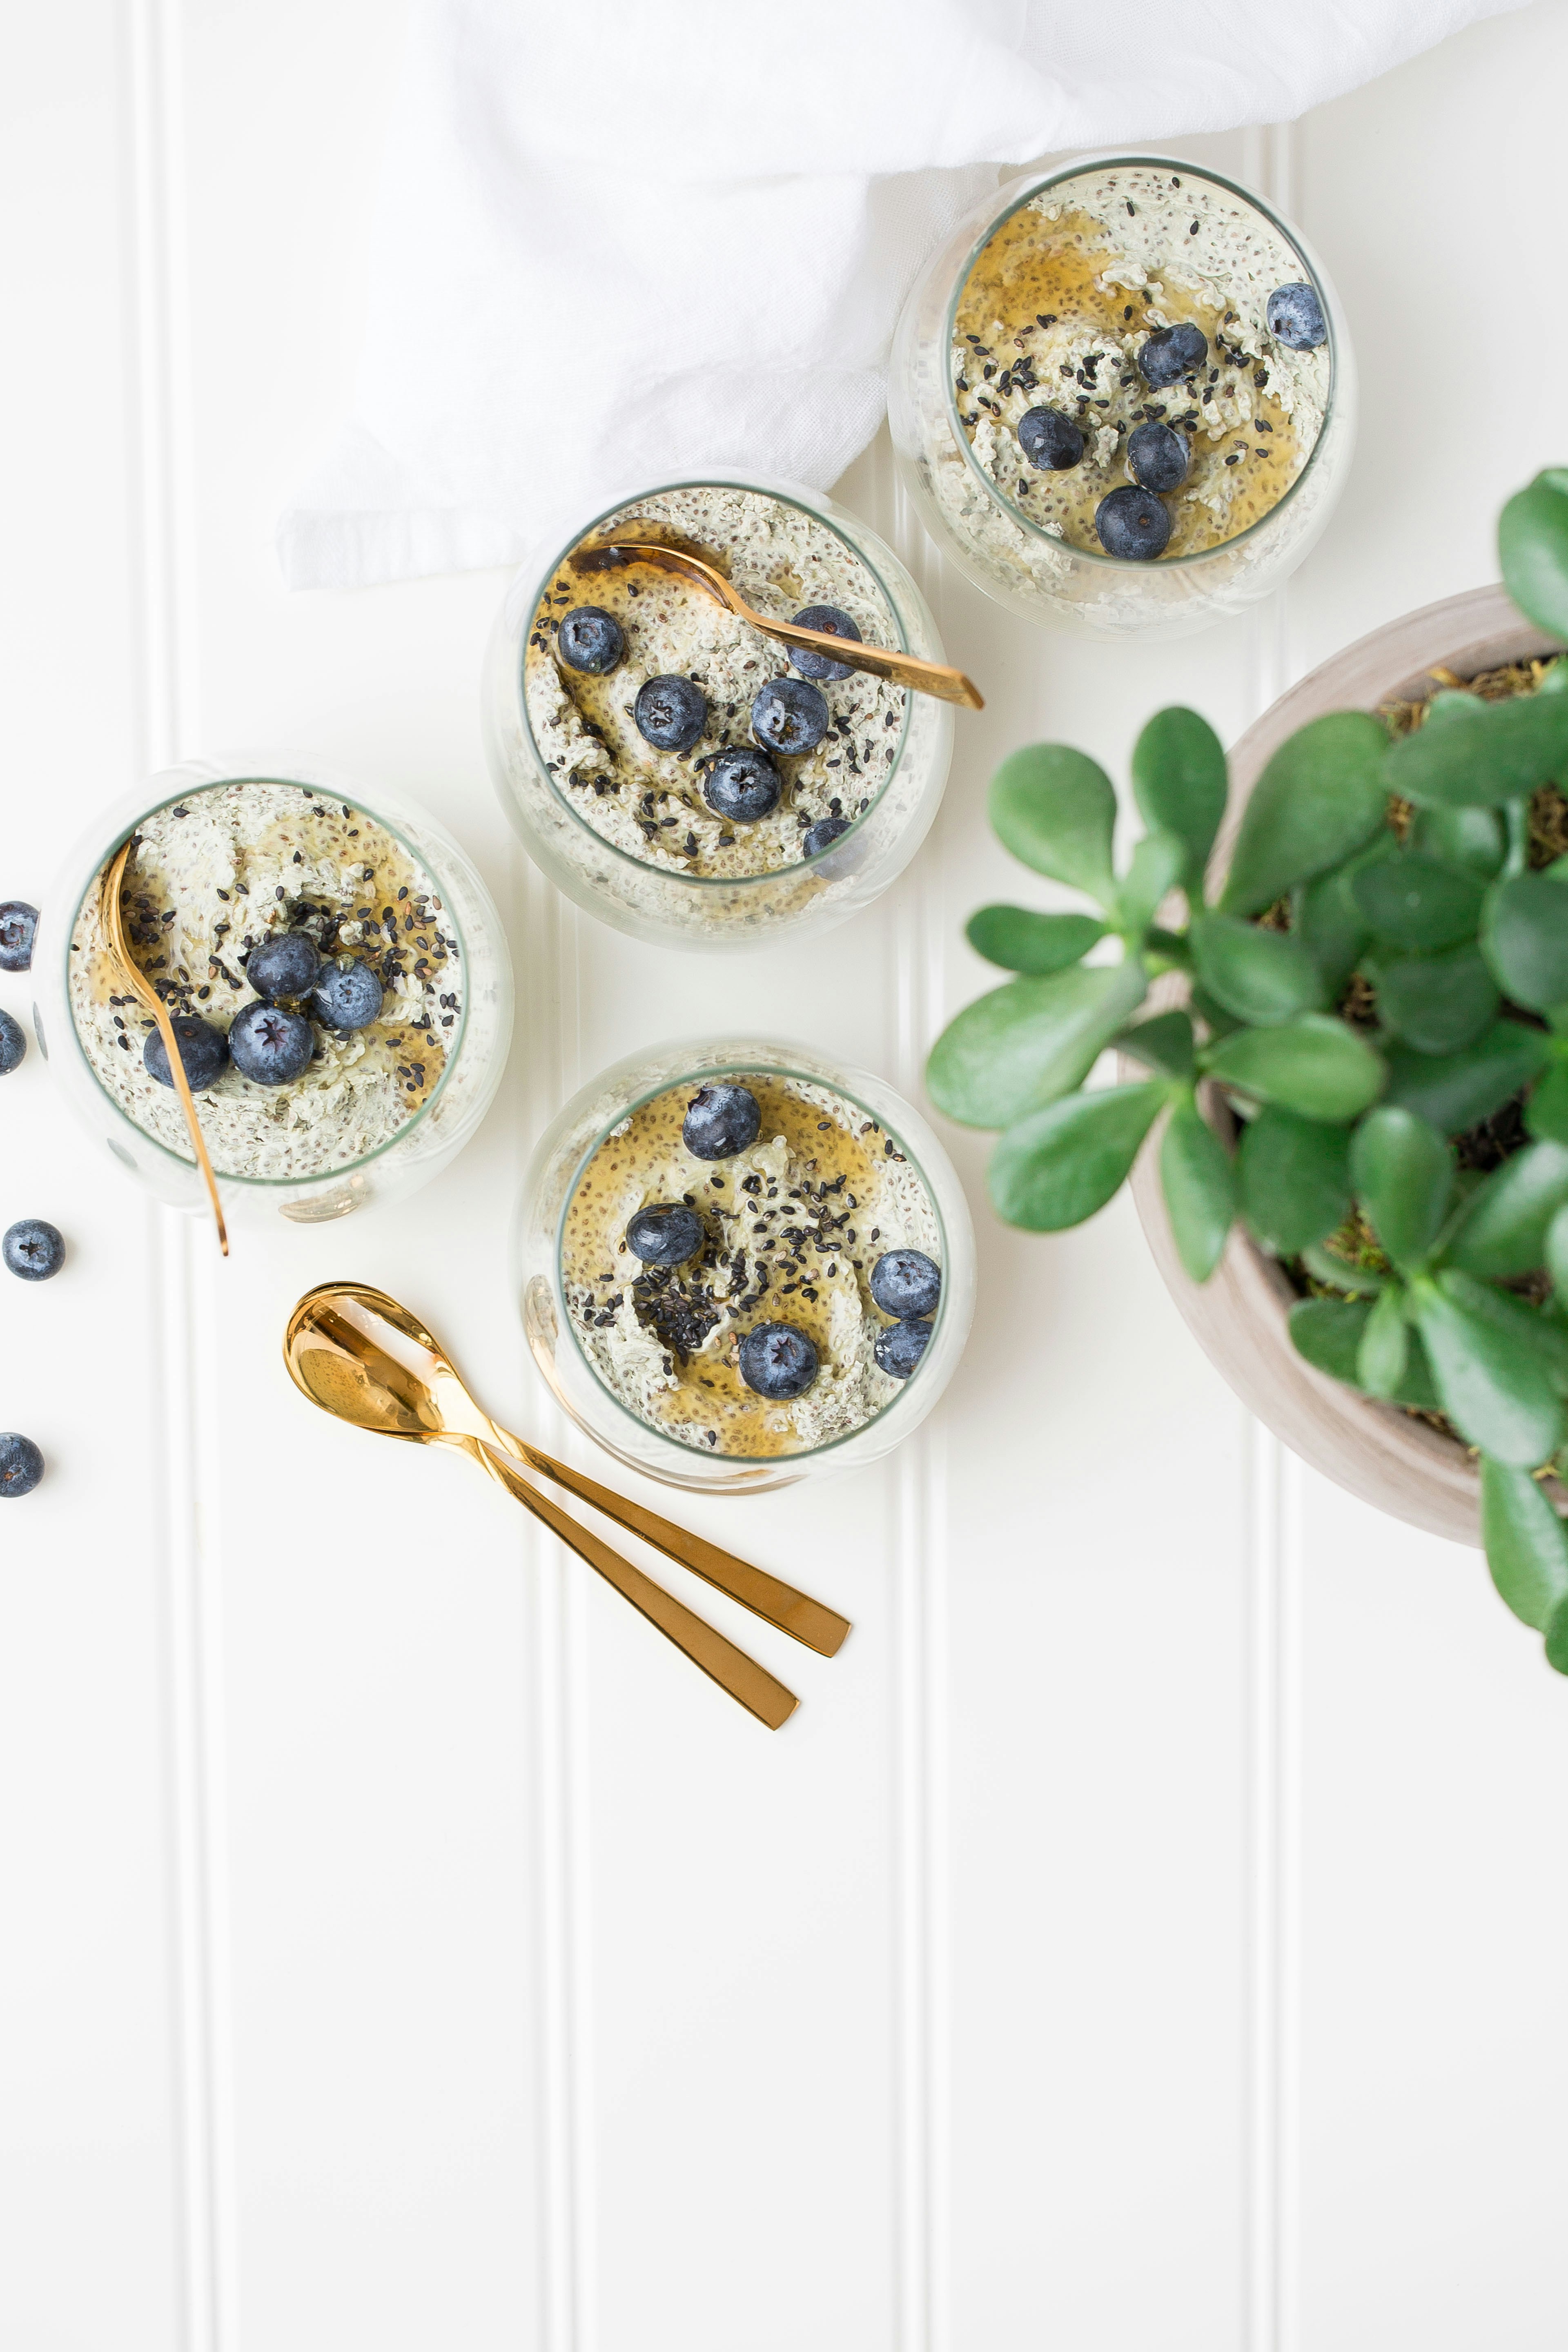 Save time with Simple Keto Overnight Oats Recipe